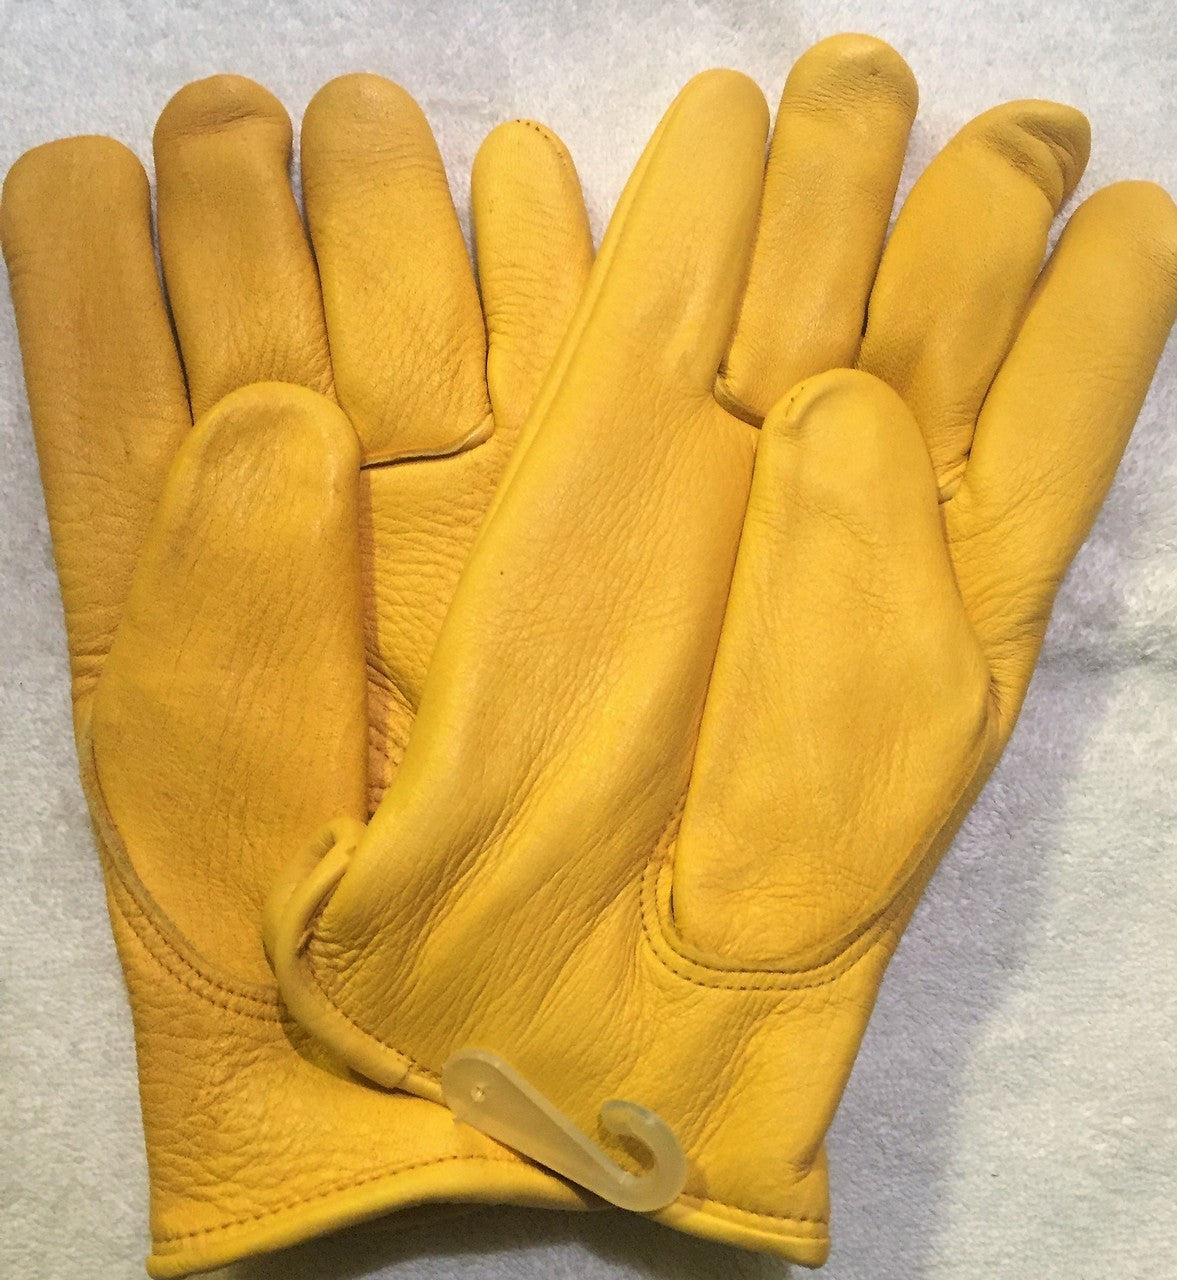 North American Trading - elk leather work/driving gloves